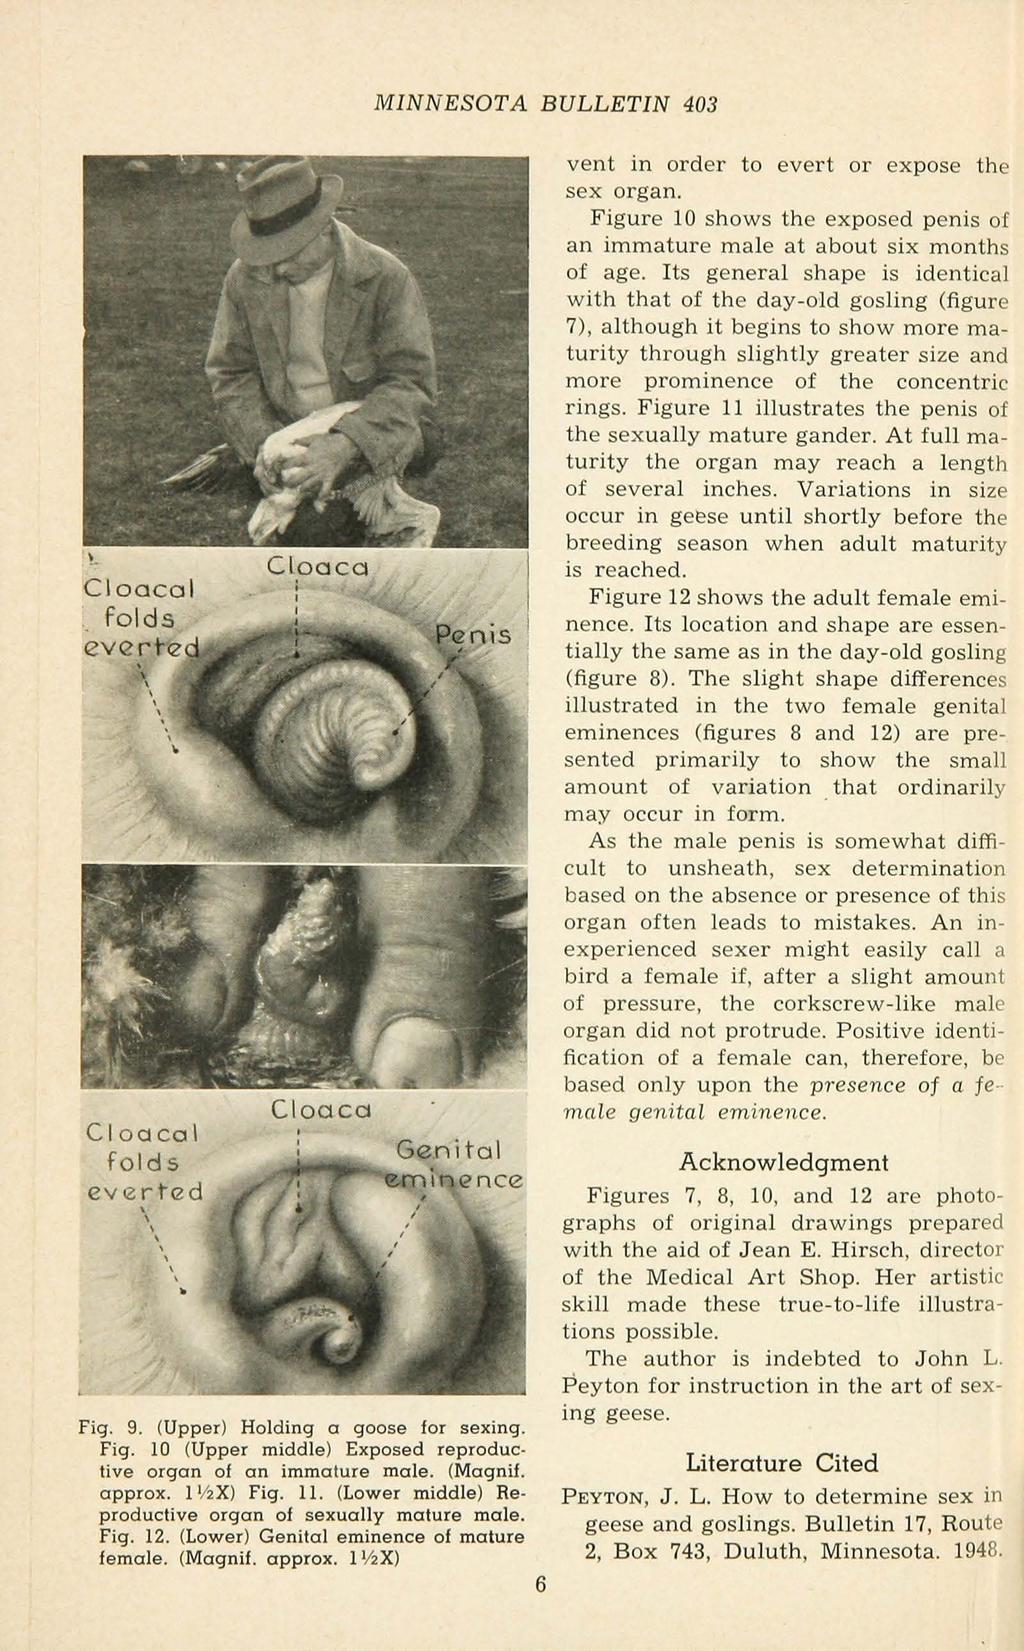 Cloacal folds everted ' ' ' \ ' ' '. Cloaca MINNESOTA BULLETIN 403 Fig. 9. (Upper) Holding a goose for sexing. Fig. 10 (Upper middle) Exposed reproducti ve organ of an immature male. (Magnif. approx.